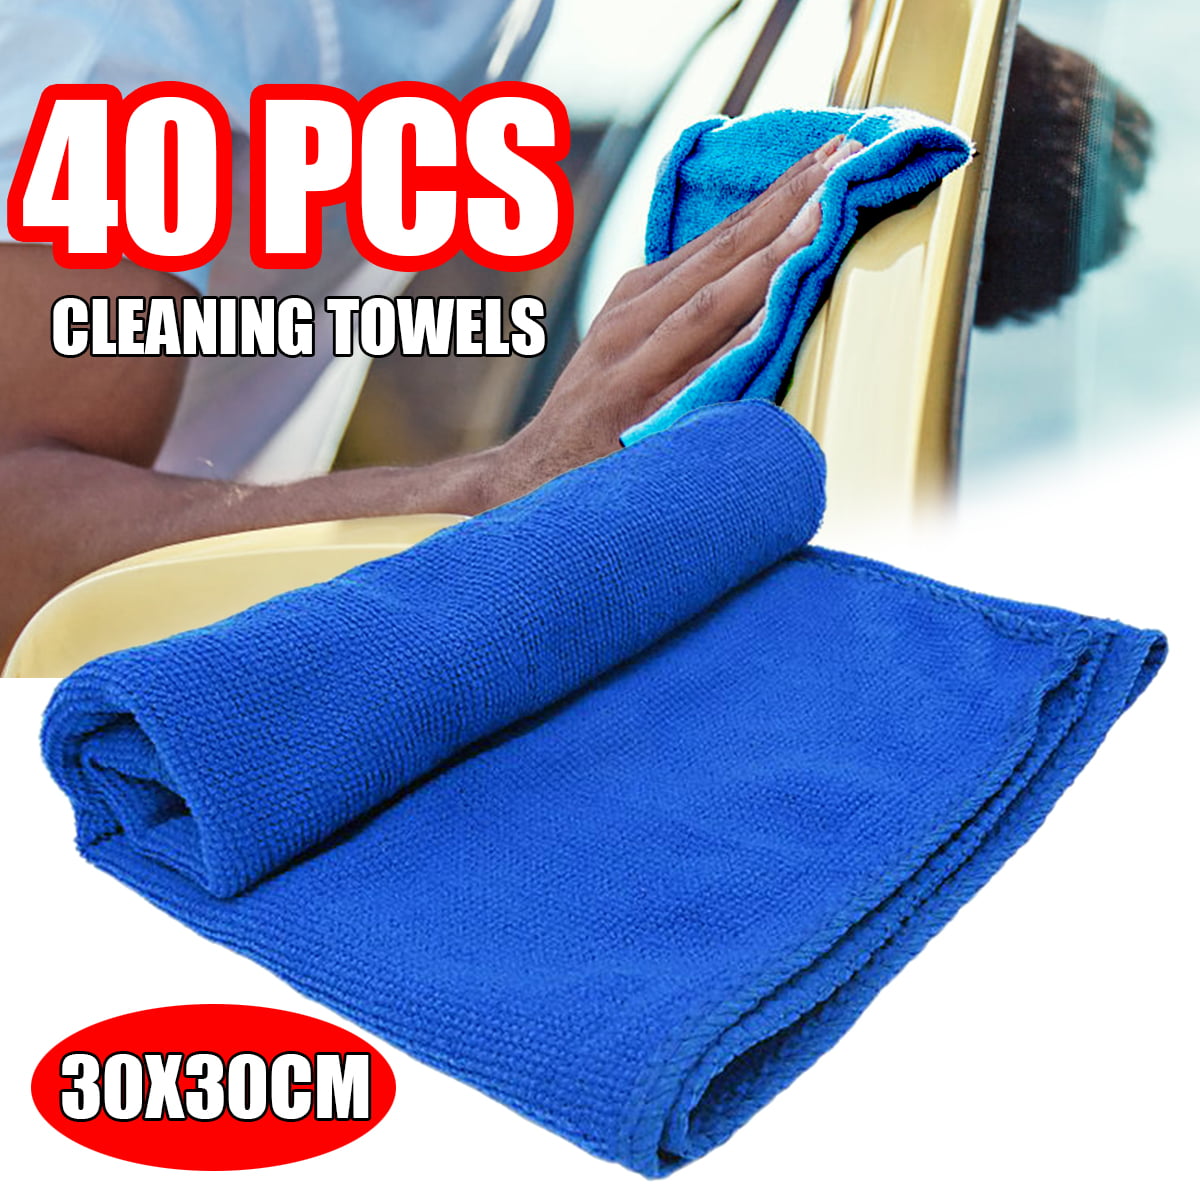 Wash Cleaning Towel Microfiber Wash Cleaning Towel Cloth for Car Absorbent Polishing Kitchen Table Bath Blue and Yellow 4237 